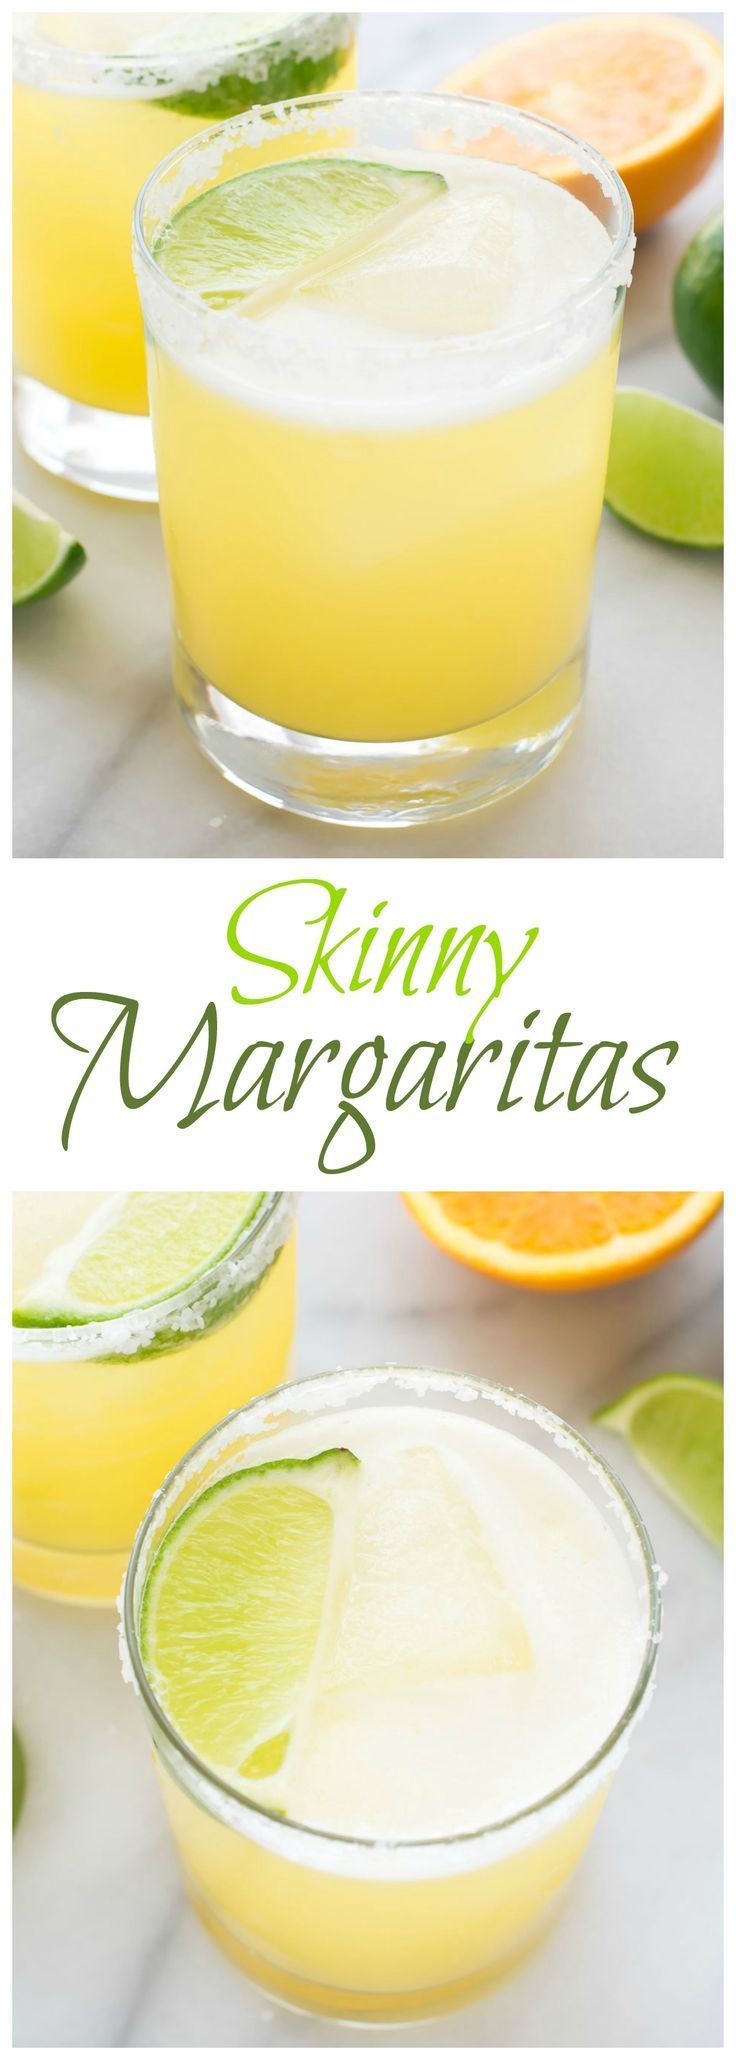 Skinny Margarita recipe — all of the refreshing margarita taste without the calories! Made simply with fresh juices, agave, and